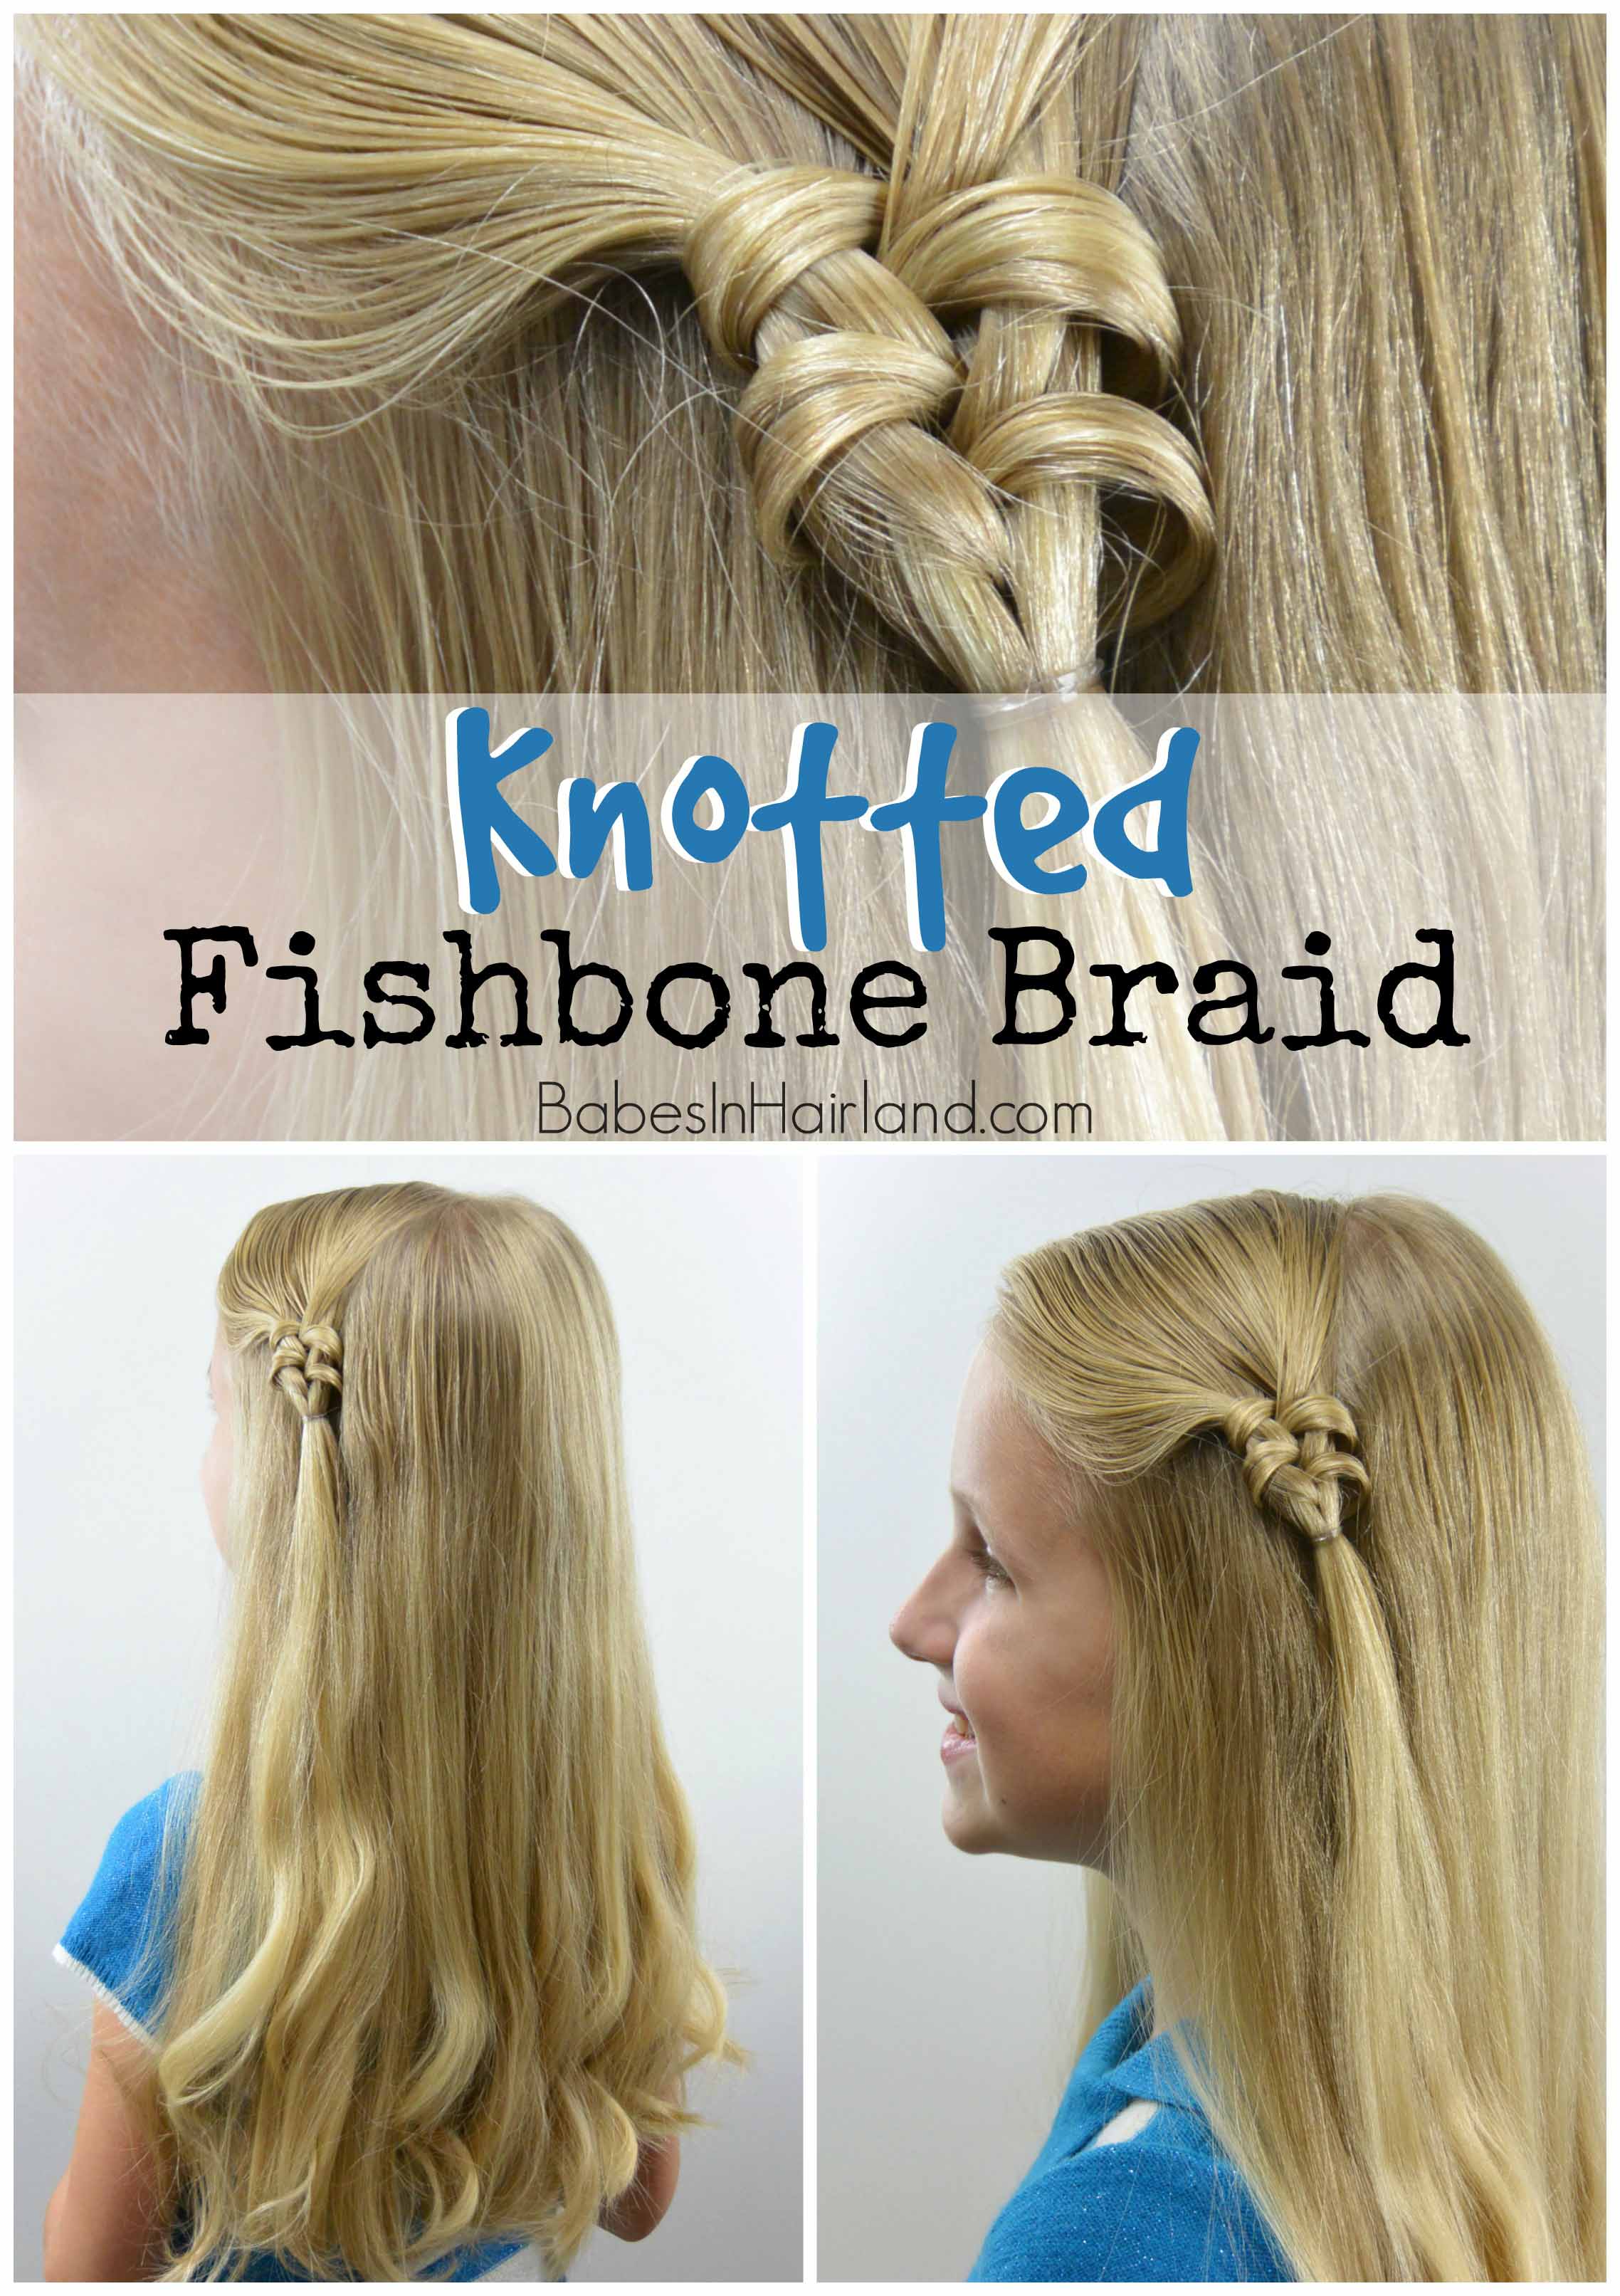 Knotted Fishbone Braid - Babes In Hairland